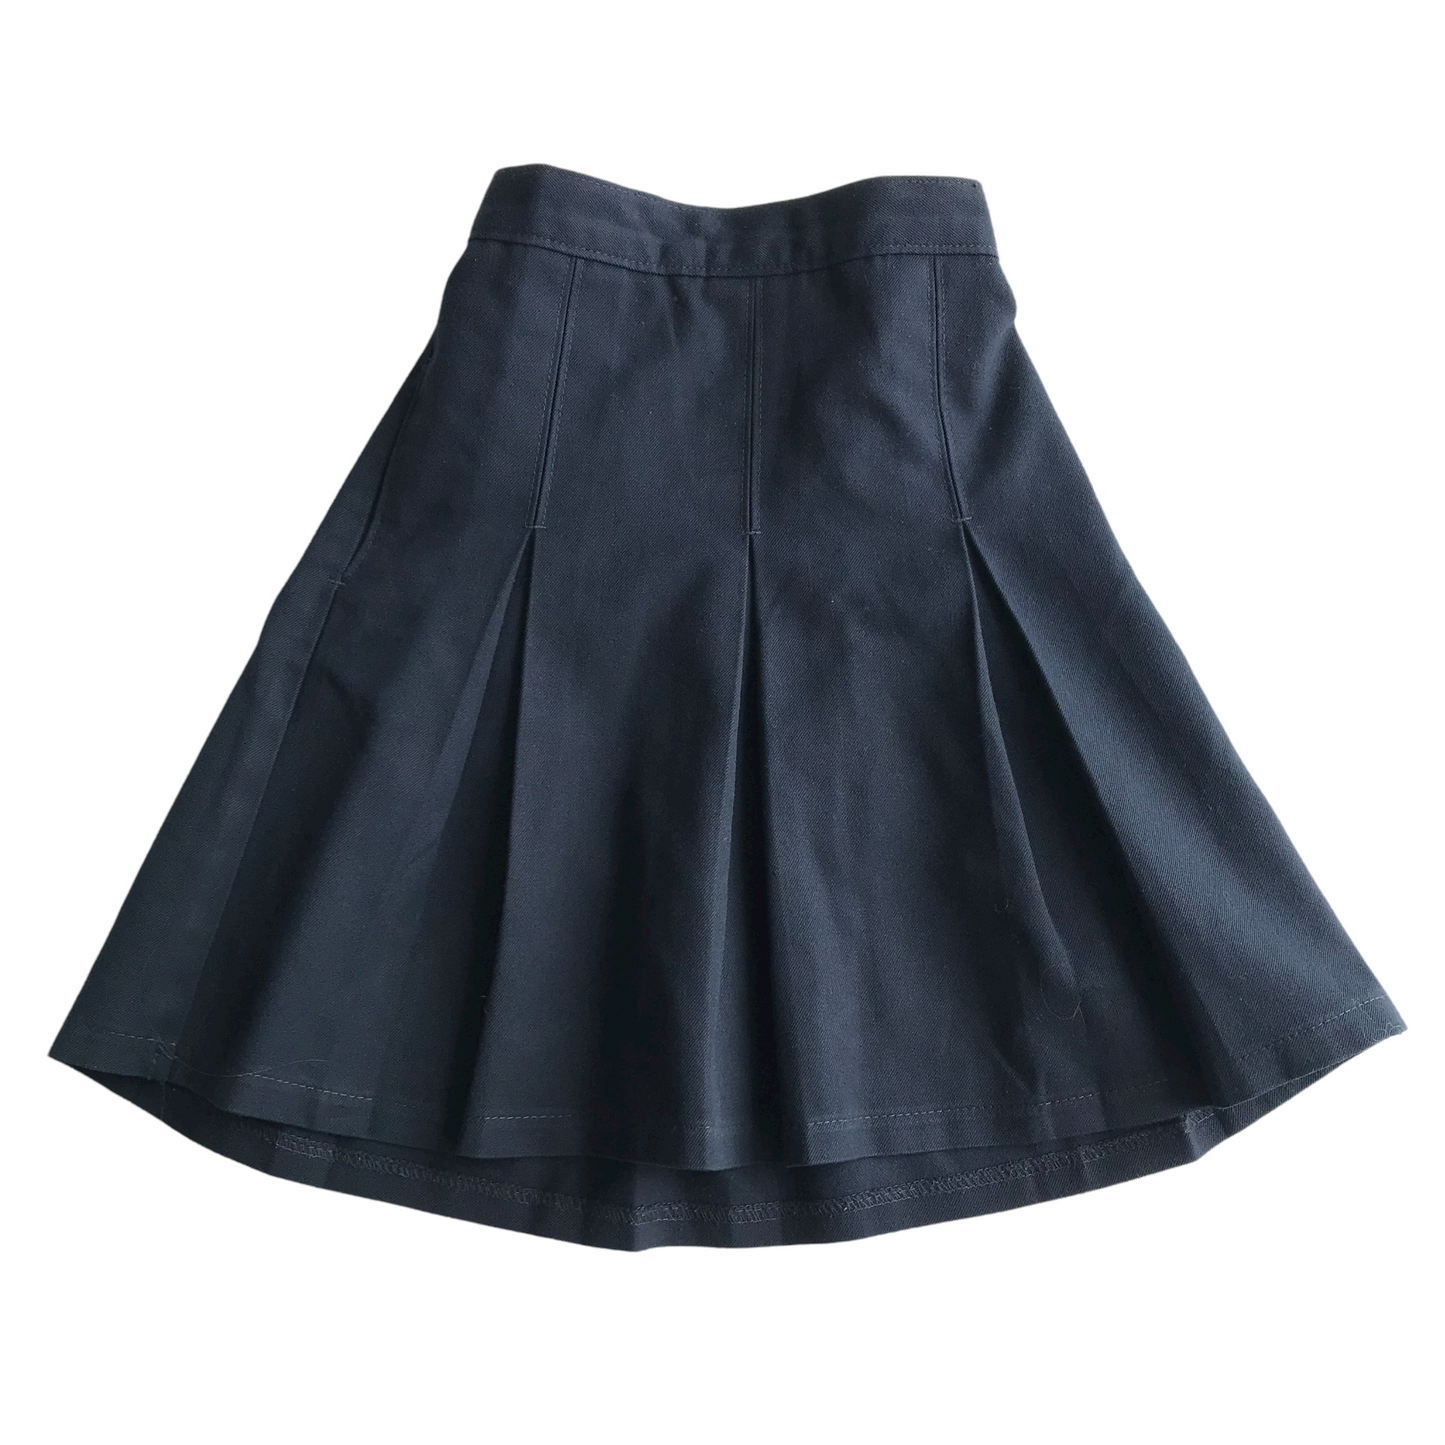 Navy Blue School Skirt with Thin Waistband and pleats